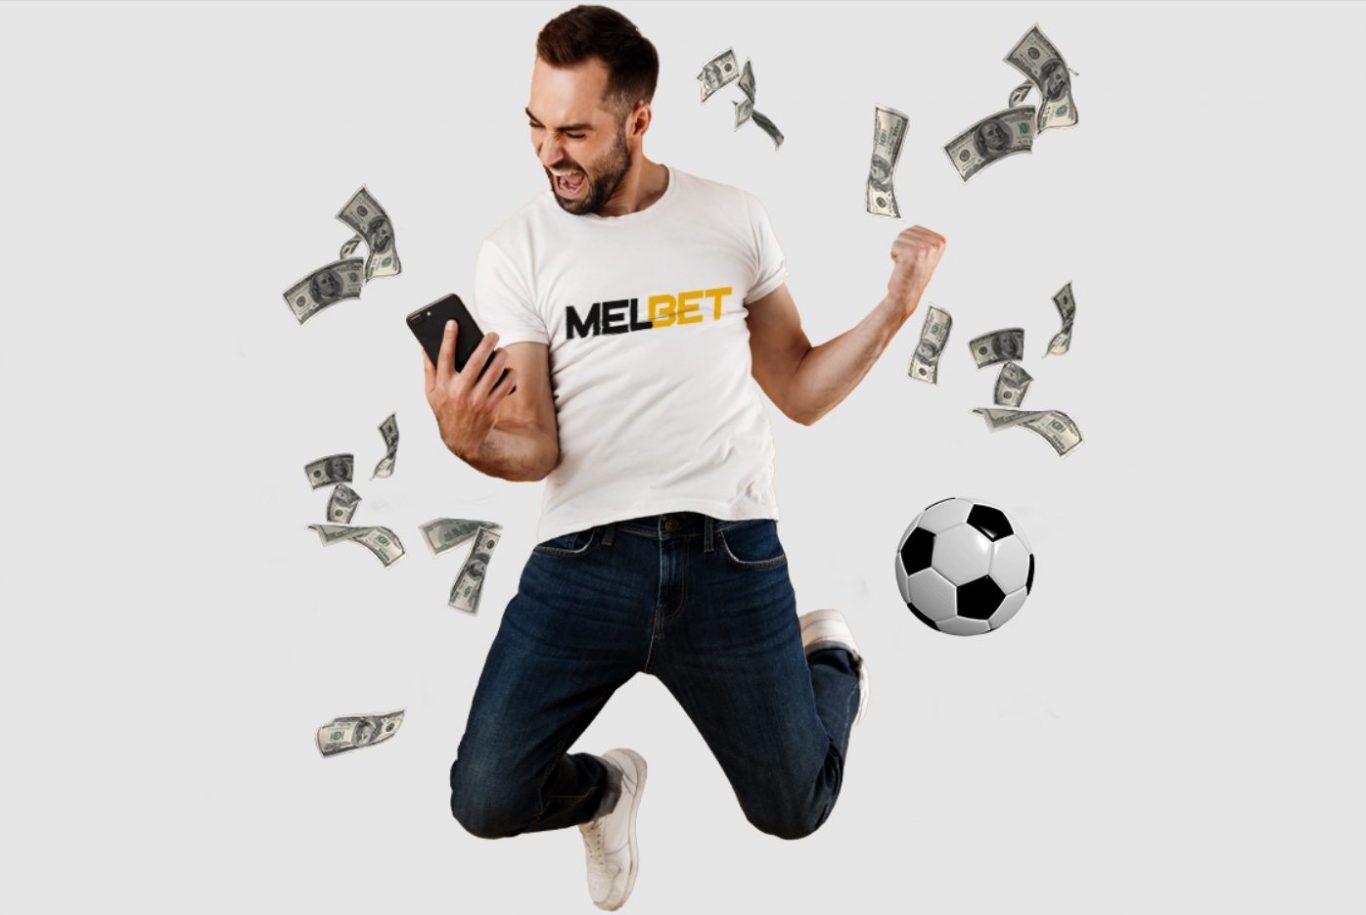 Melbet app – how to place bets